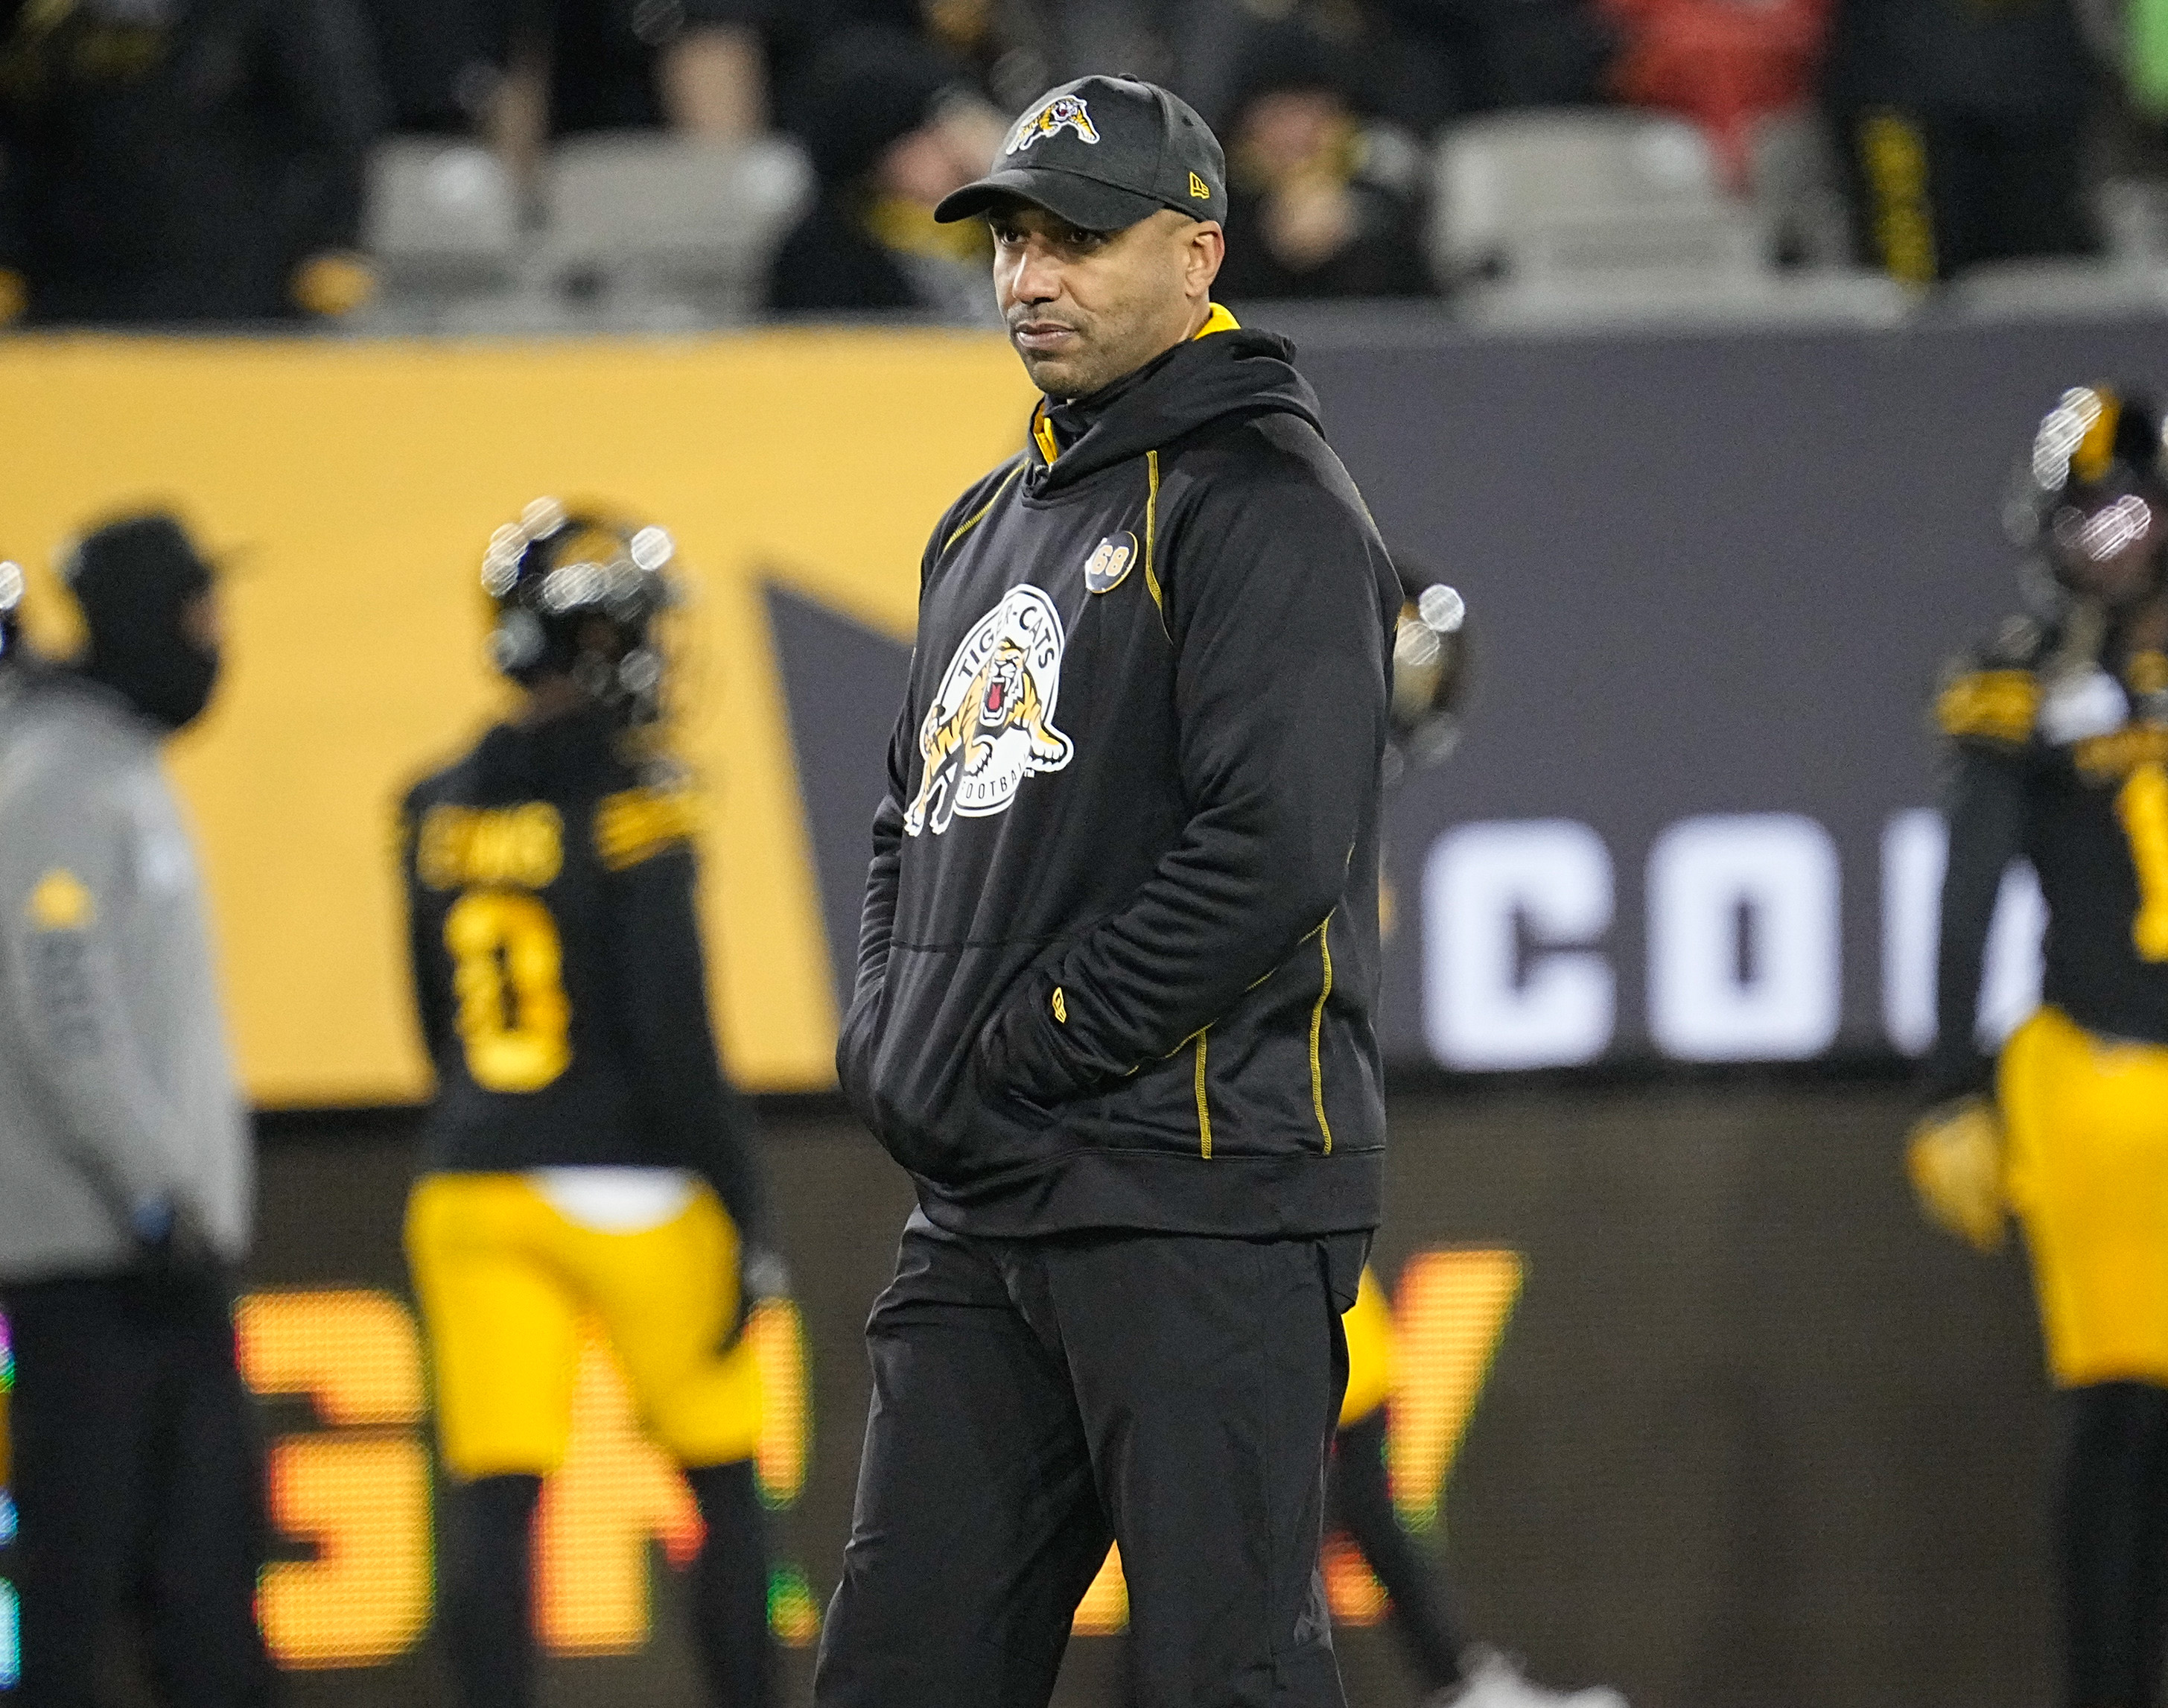 Dec 12, 2021; Hamilton, Ontario, CAN; Hamilton Tiger-Cats head coach Orlondo Steinauer during the warm ups of the 108th Grey Cup football game against the Winnipeg Blue Bombers at Tim Hortons Field. Mandatory Credit: John E. Sokolowski-USA TODAY Sports